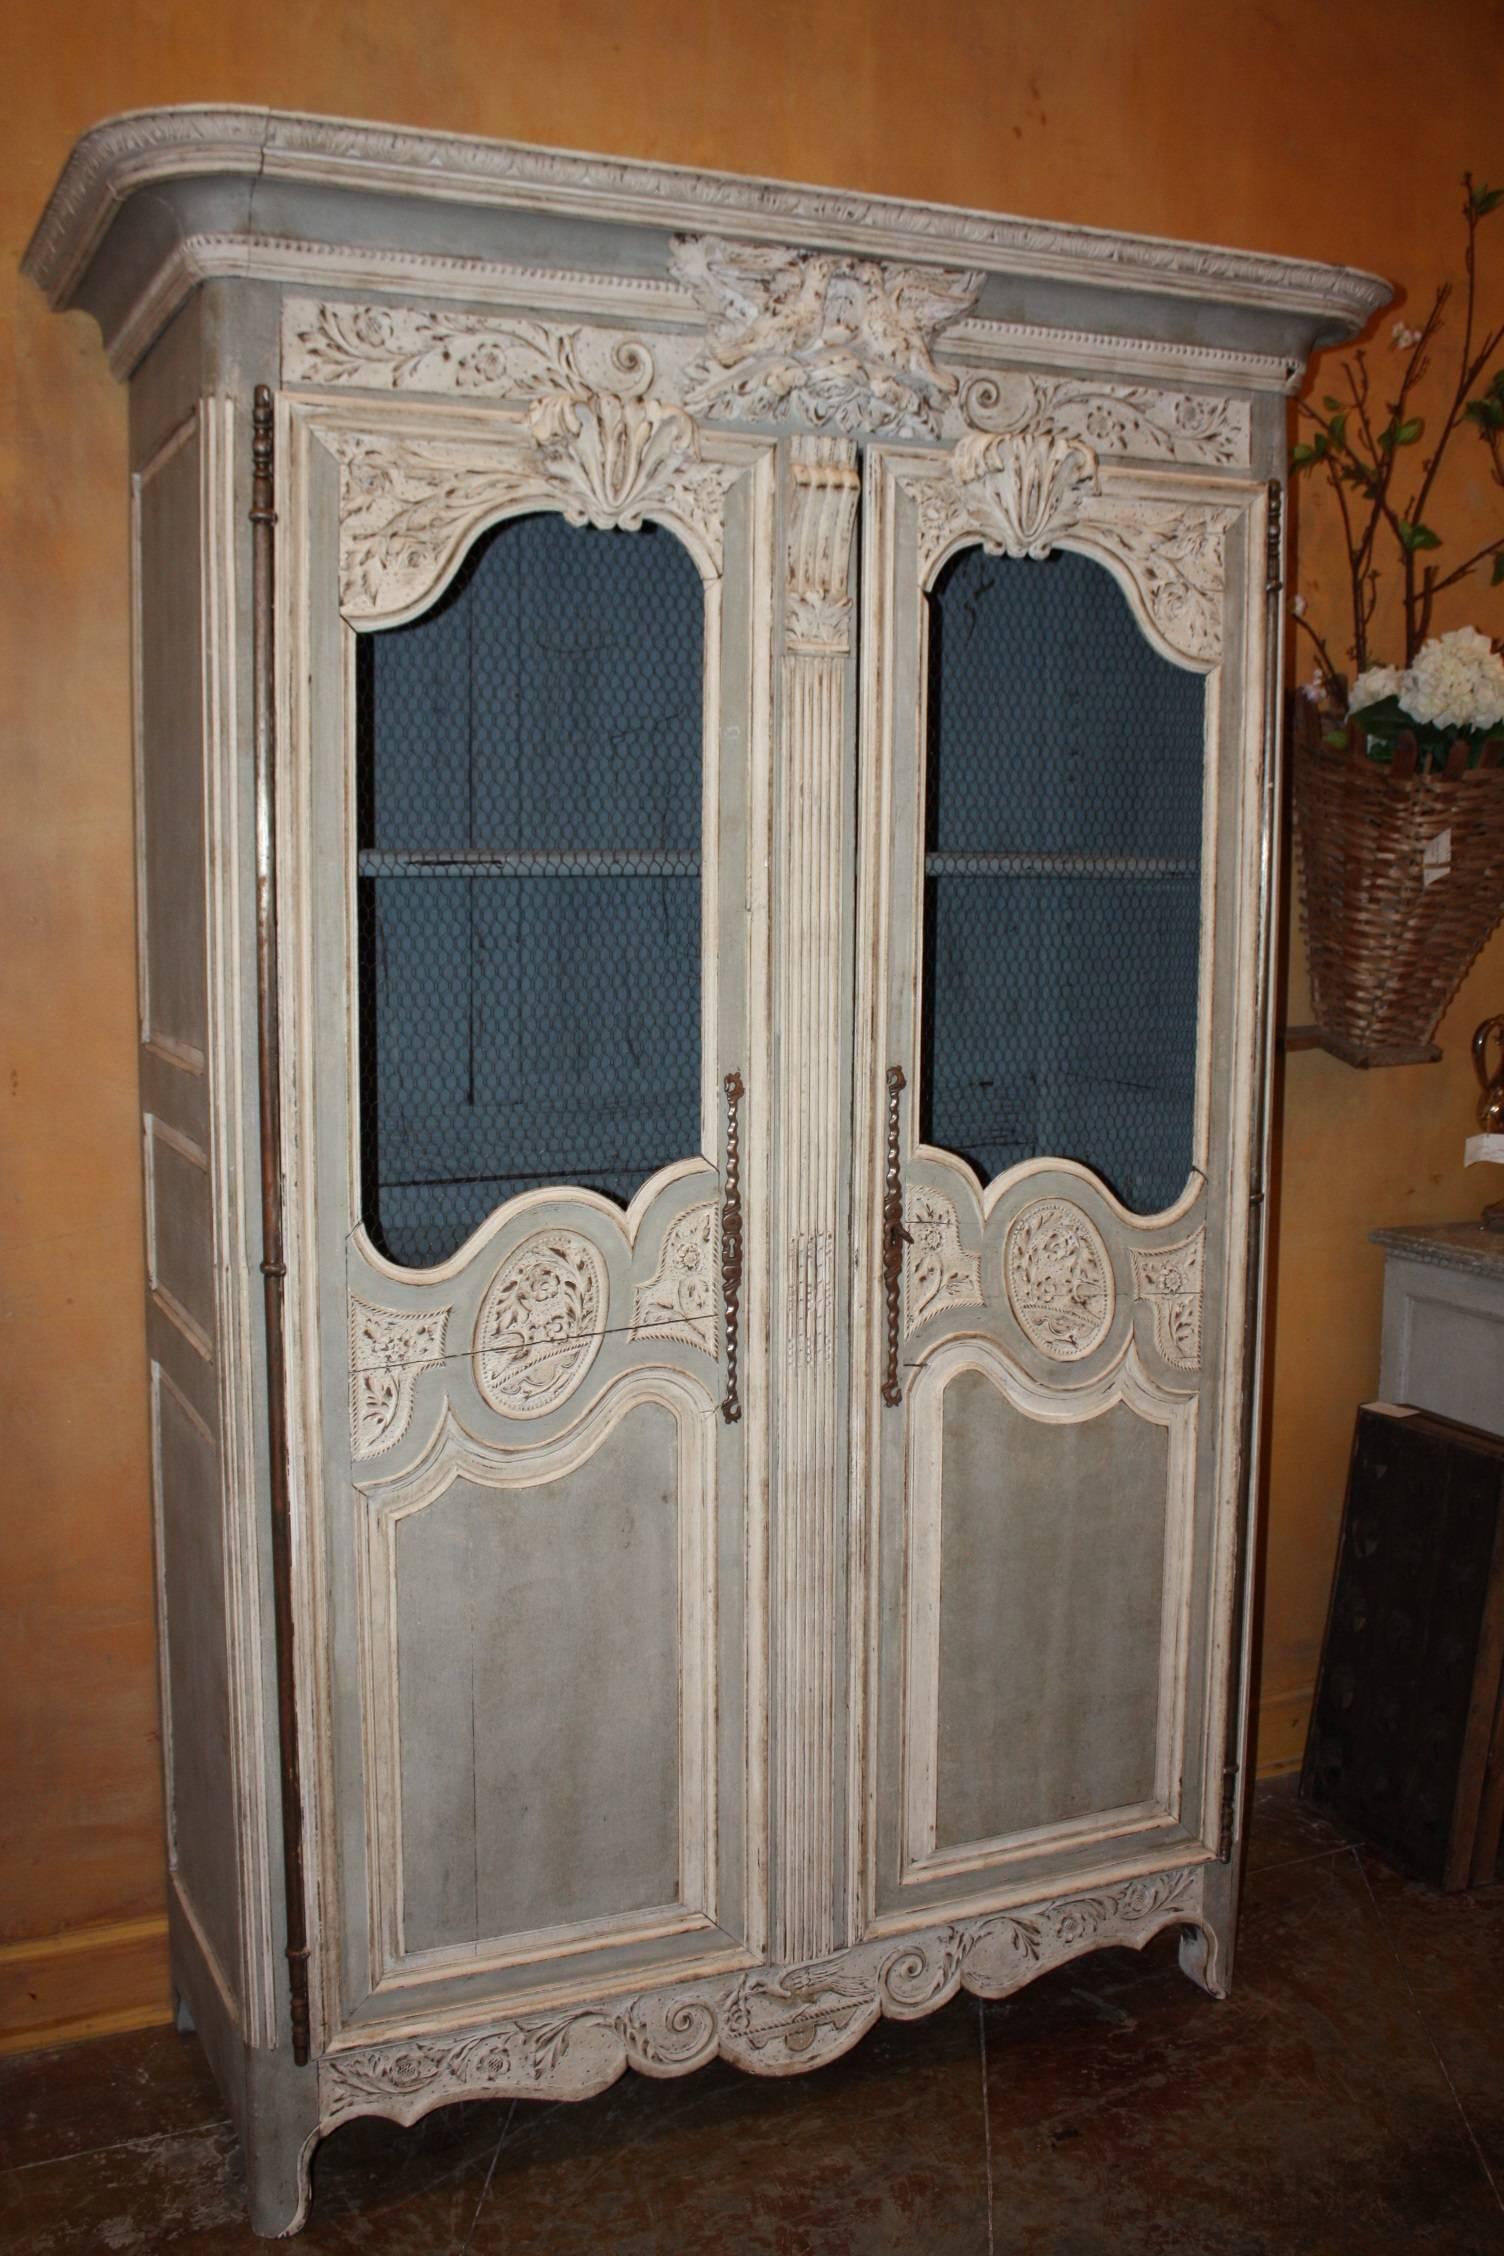 Beautifully carved French painted armoire featuring screened doors and delicate carvings such as an exceptional pair of lovebirds on the top crest. The armoire opens as great place for storage.